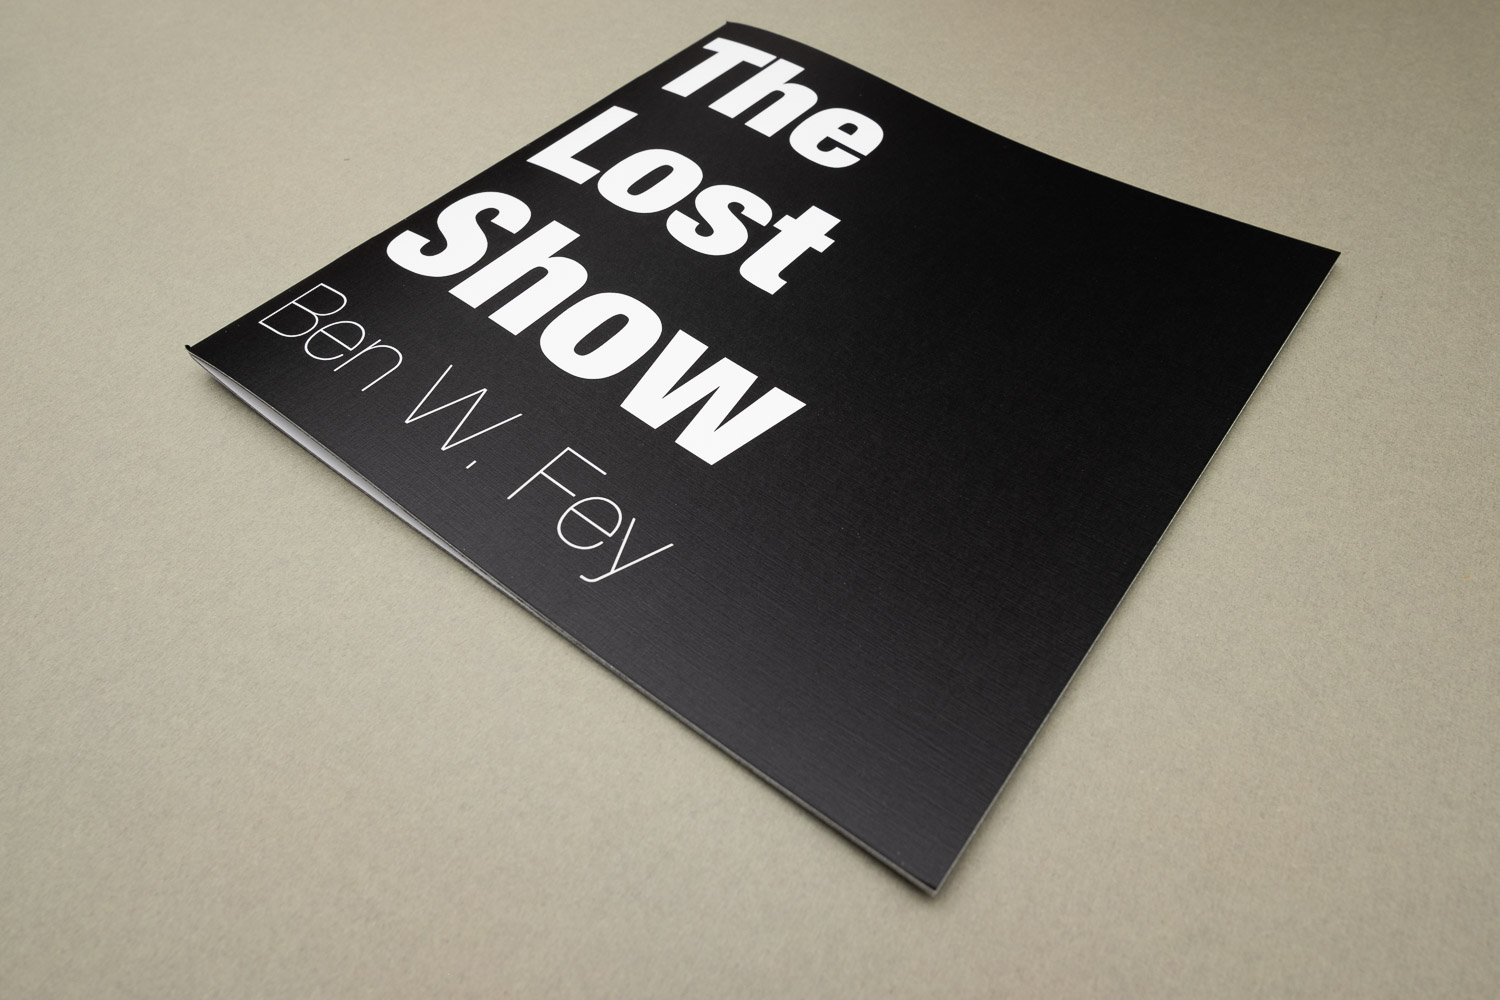 The Lost Show zine by Ben W. Fey